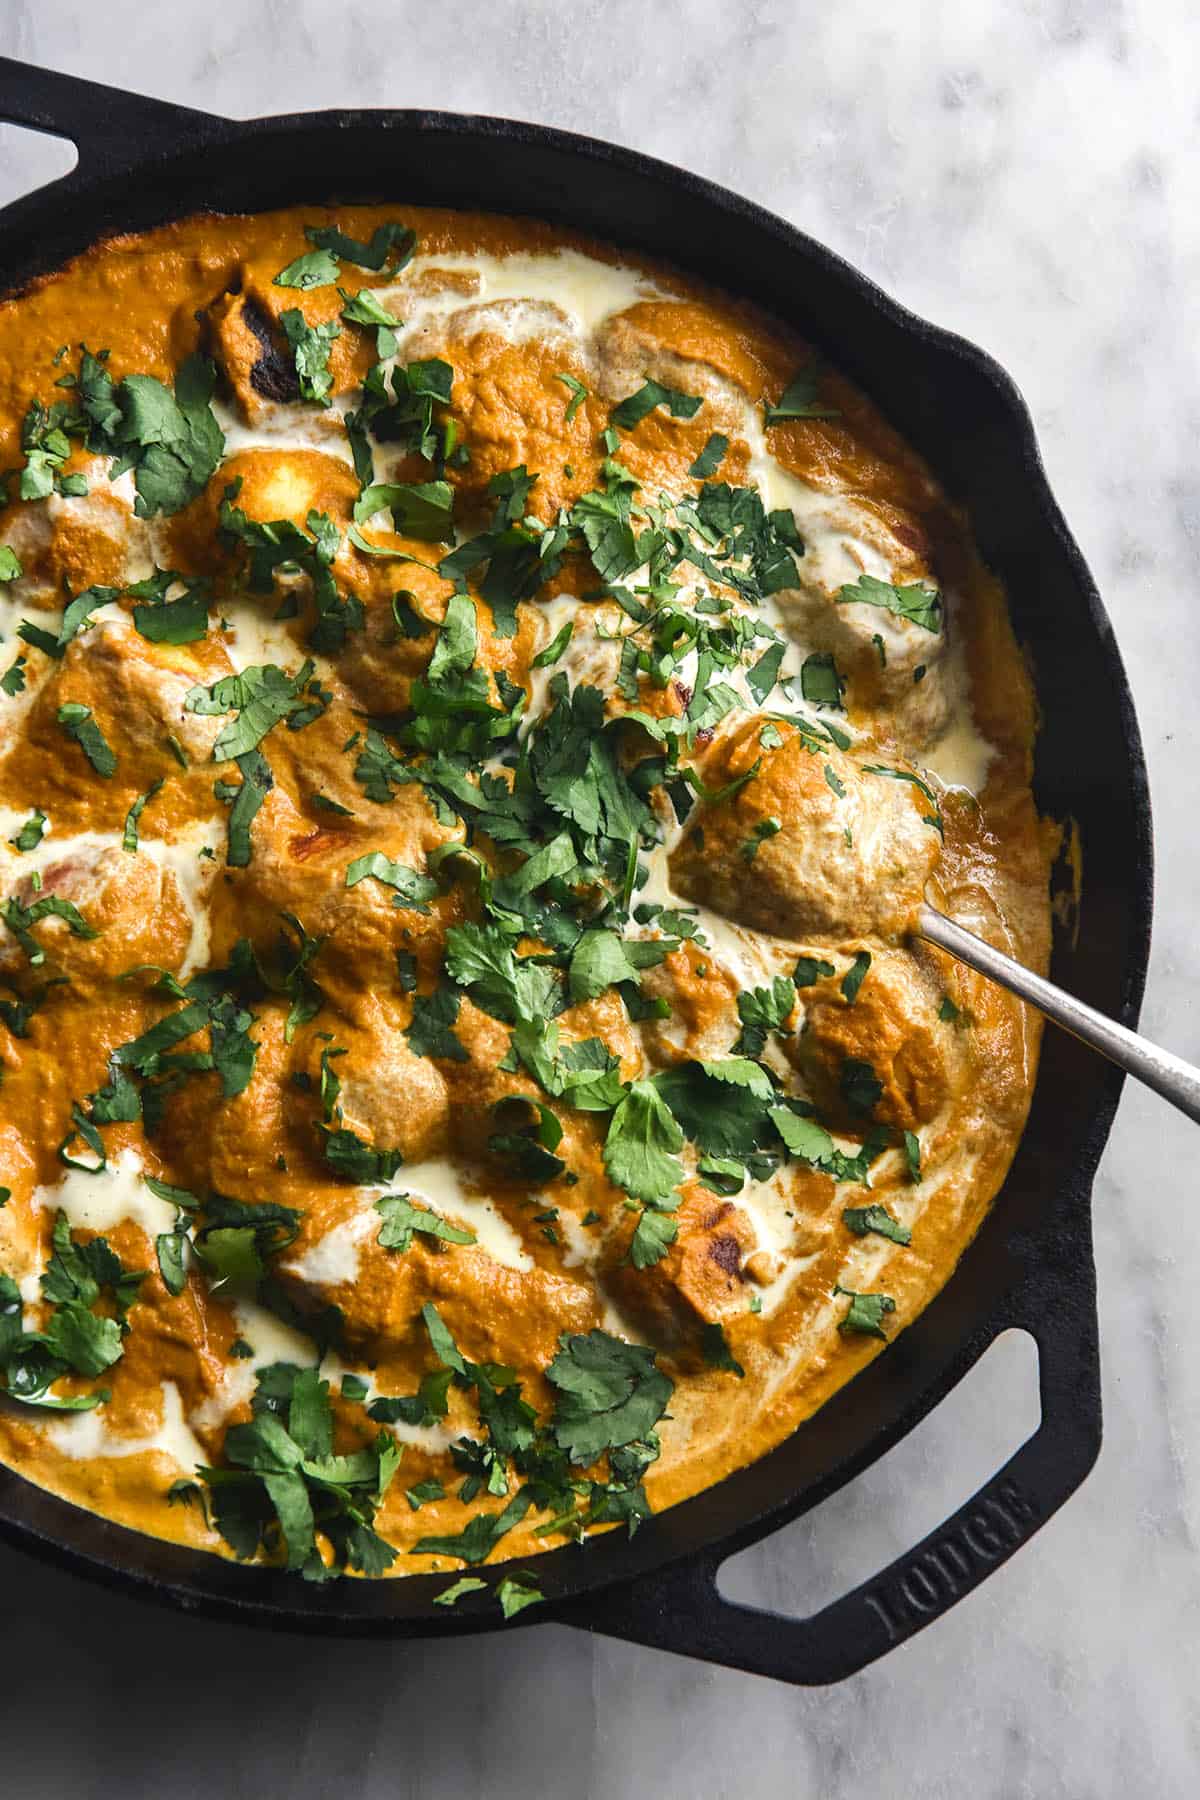 An aerial view of FODMAP friendly Malai kofta in a large black skillet. The Malai kofta is topped with cream and coriander and sits on a white marble table.